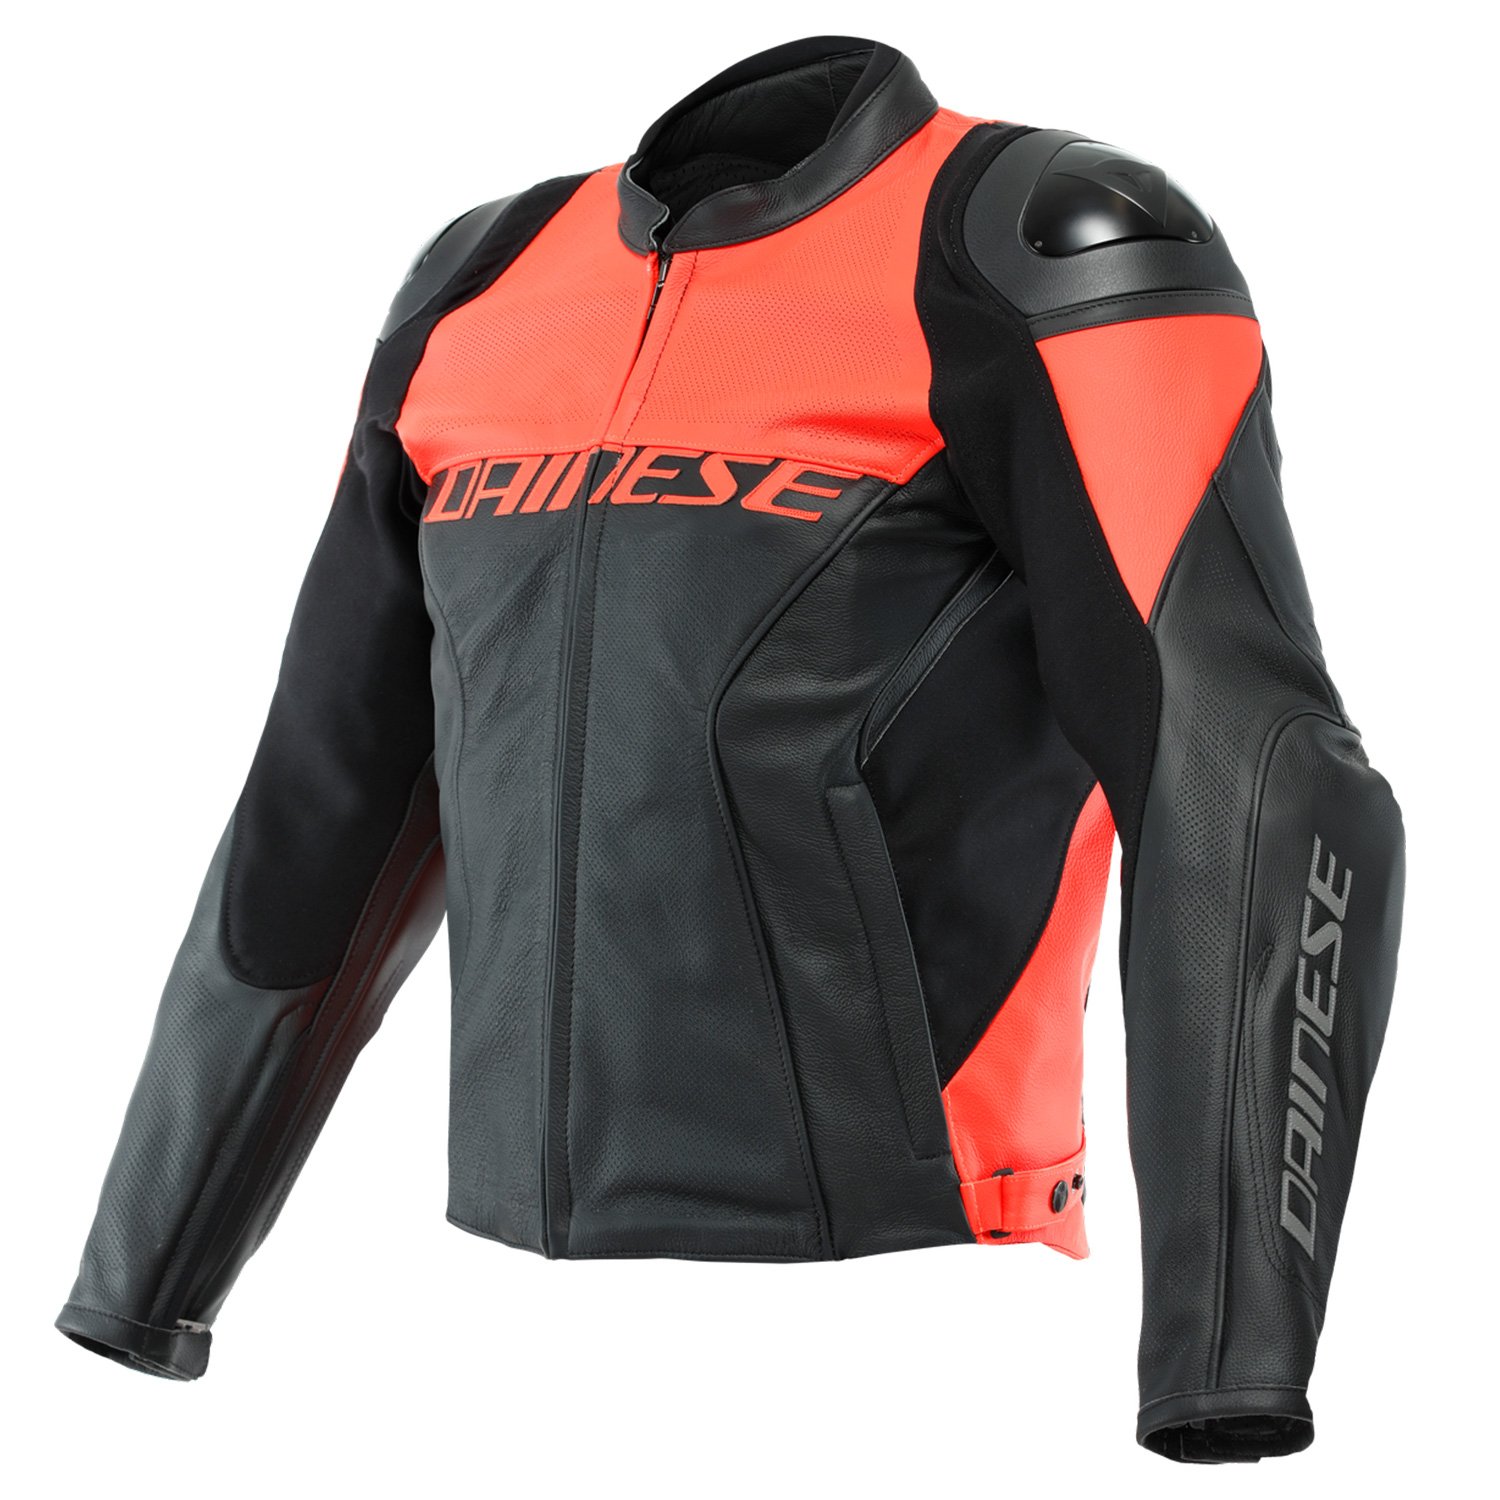 Image of Dainese Racing 4 Perforated Leather Jacket Black Fluo Red Size 58 ID 8051019302984